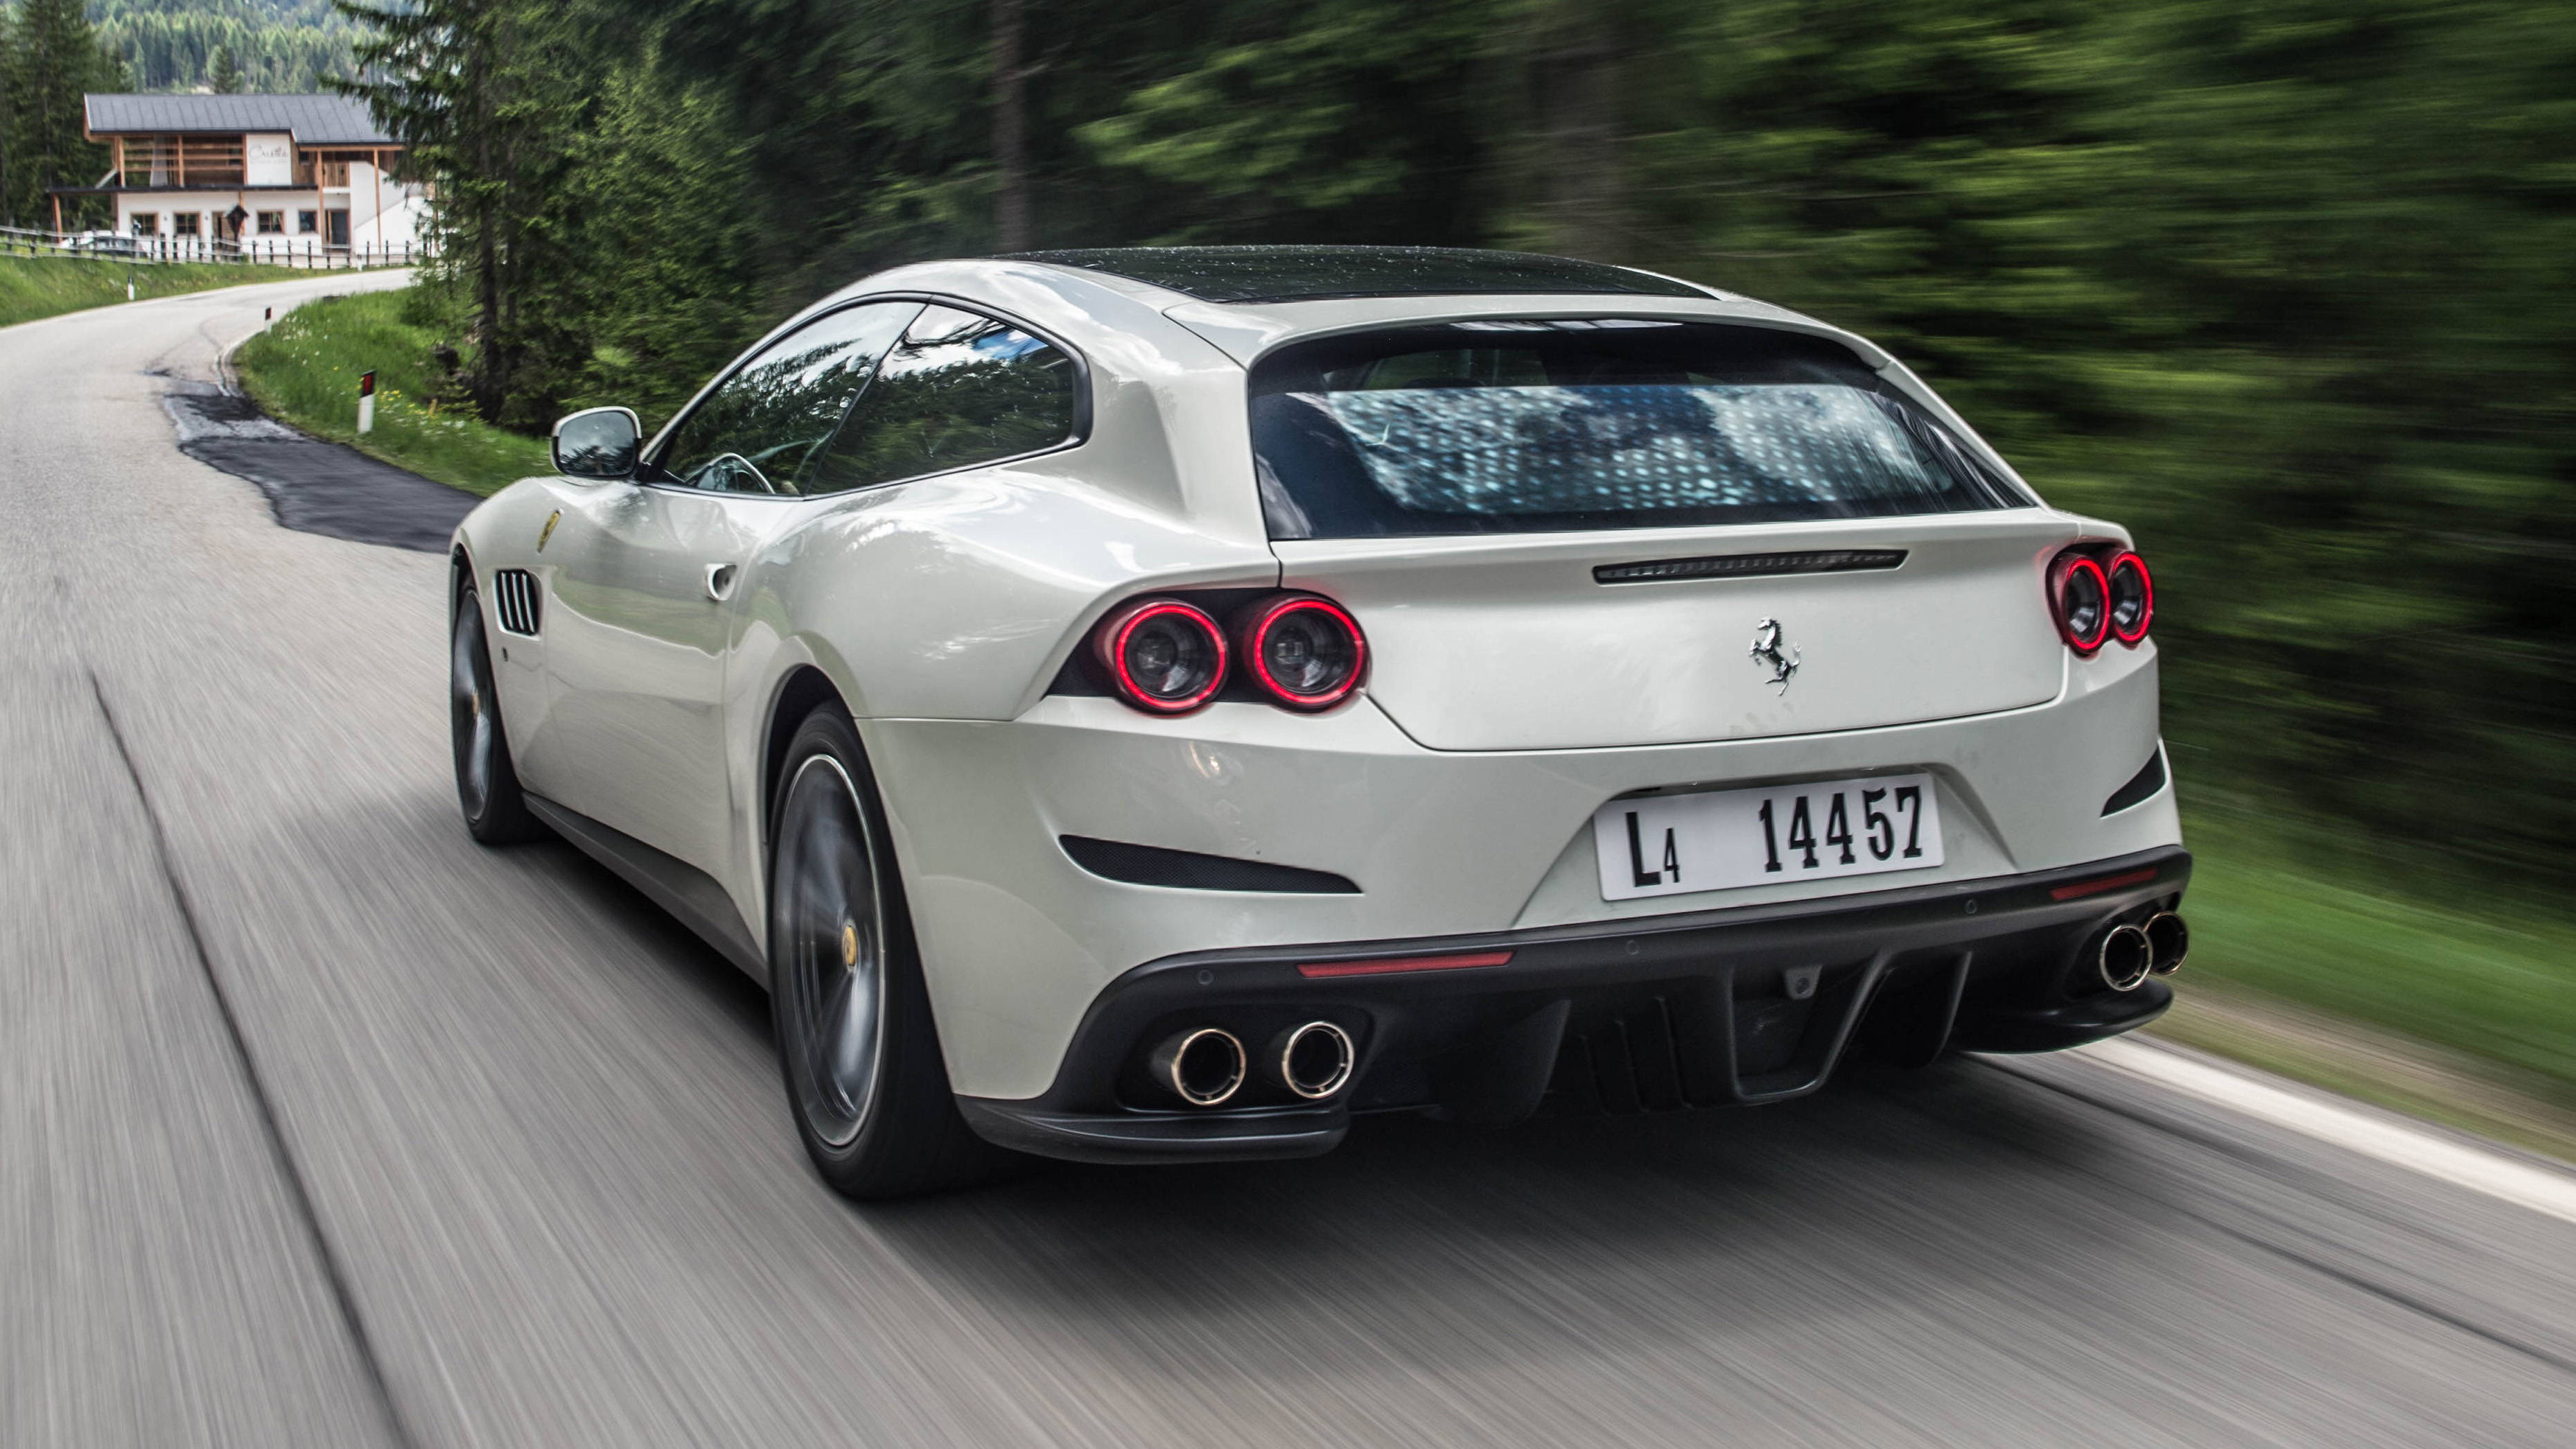 Ferrari GTC4lusso coupe restyling